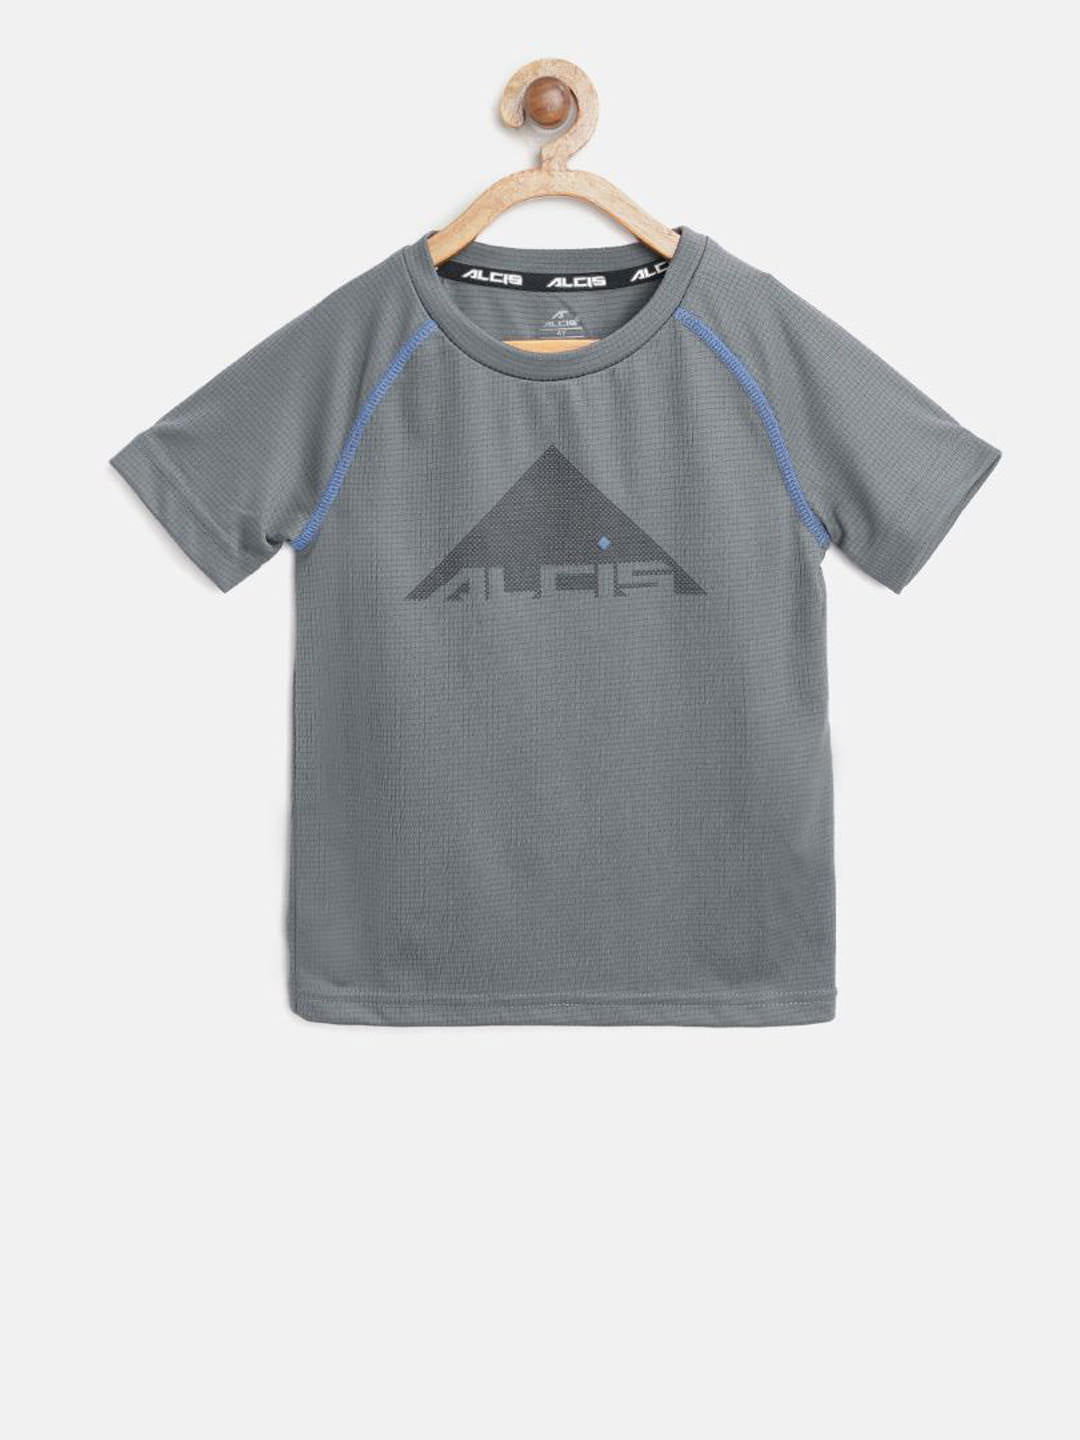 Alcis Boys Charcoal Grey Self-Checked Slim Fit Round Neck T-shirt BTE8143-4